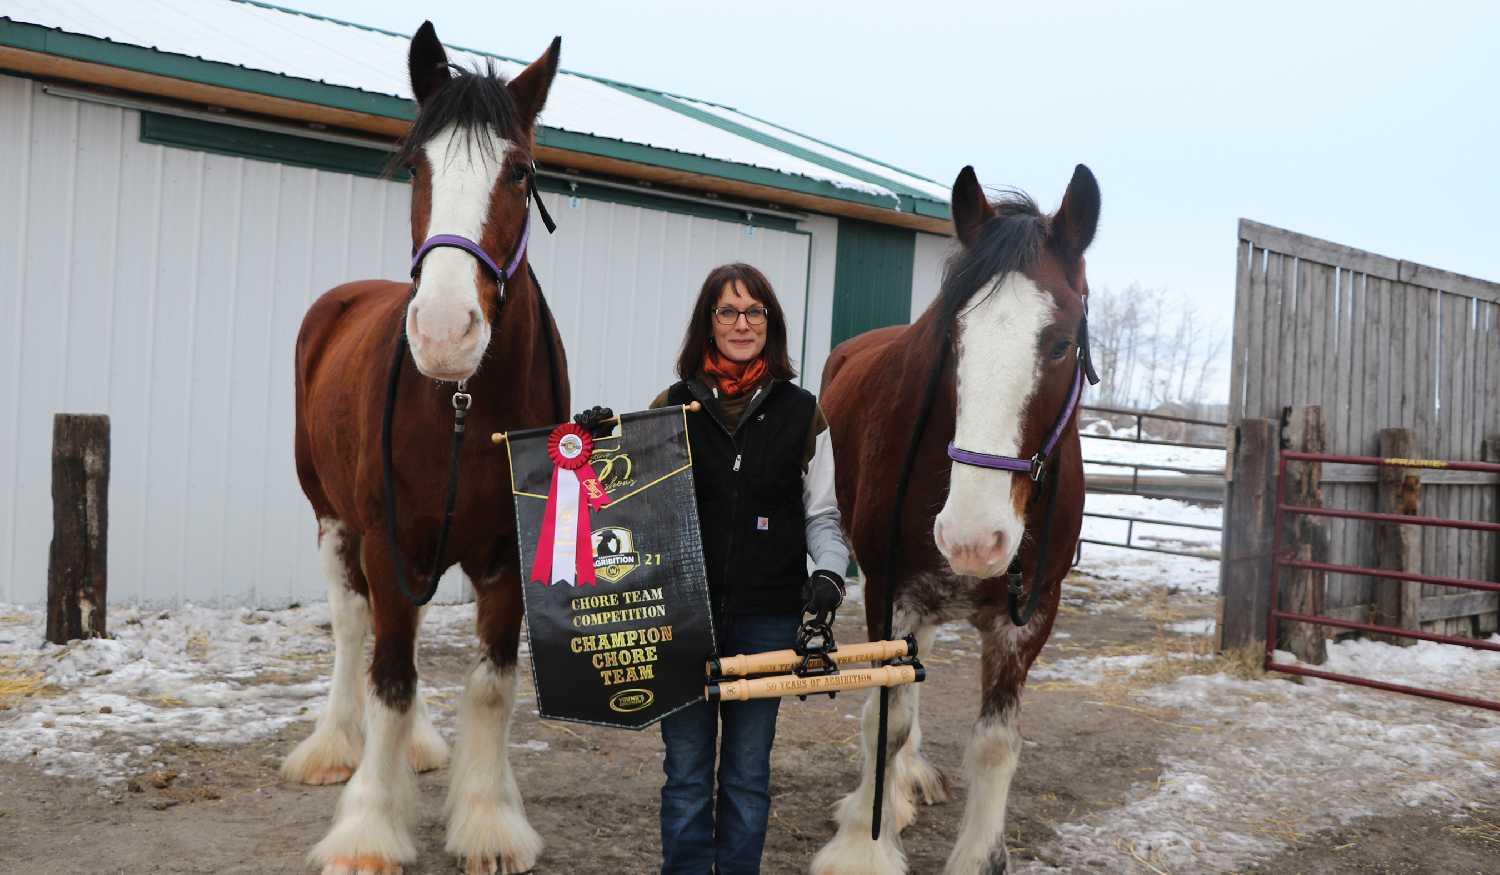 Michelle Newton took first place in the Chore Team Competition at Agribition this year. It’s the first time the competition has been won by a woman, and the first time it has been won with a team of Clydesdales. Inset is her championship buckle.